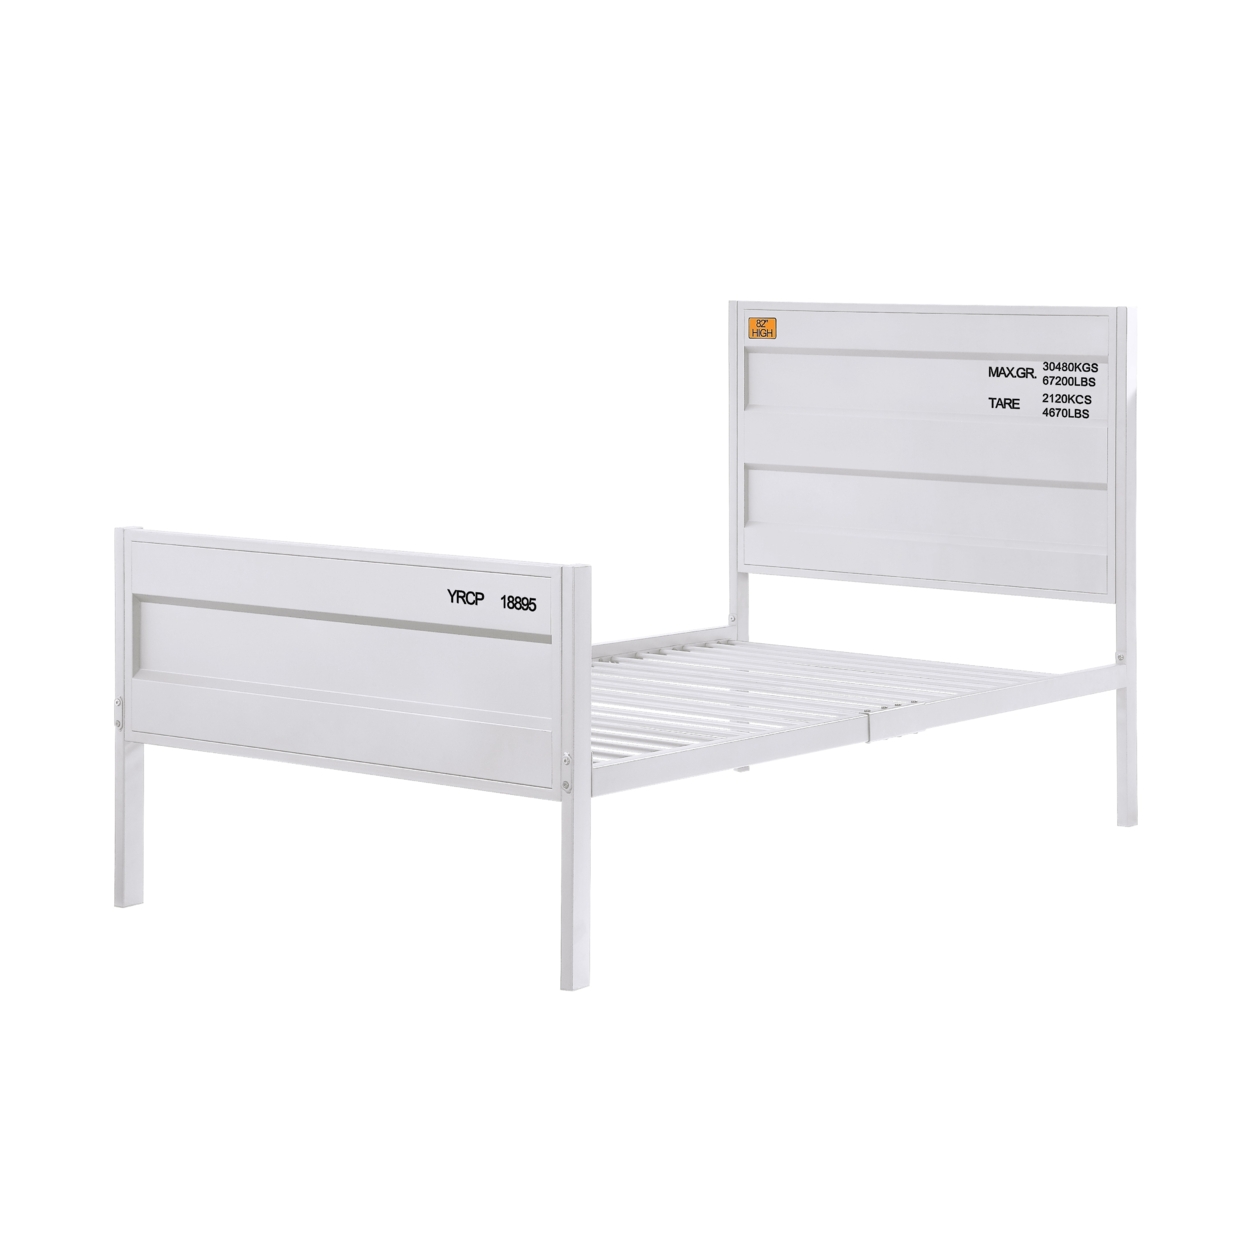 Industrial Style Metal Twin Size Bed With Straight Leg Support, White- Saltoro Sherpi